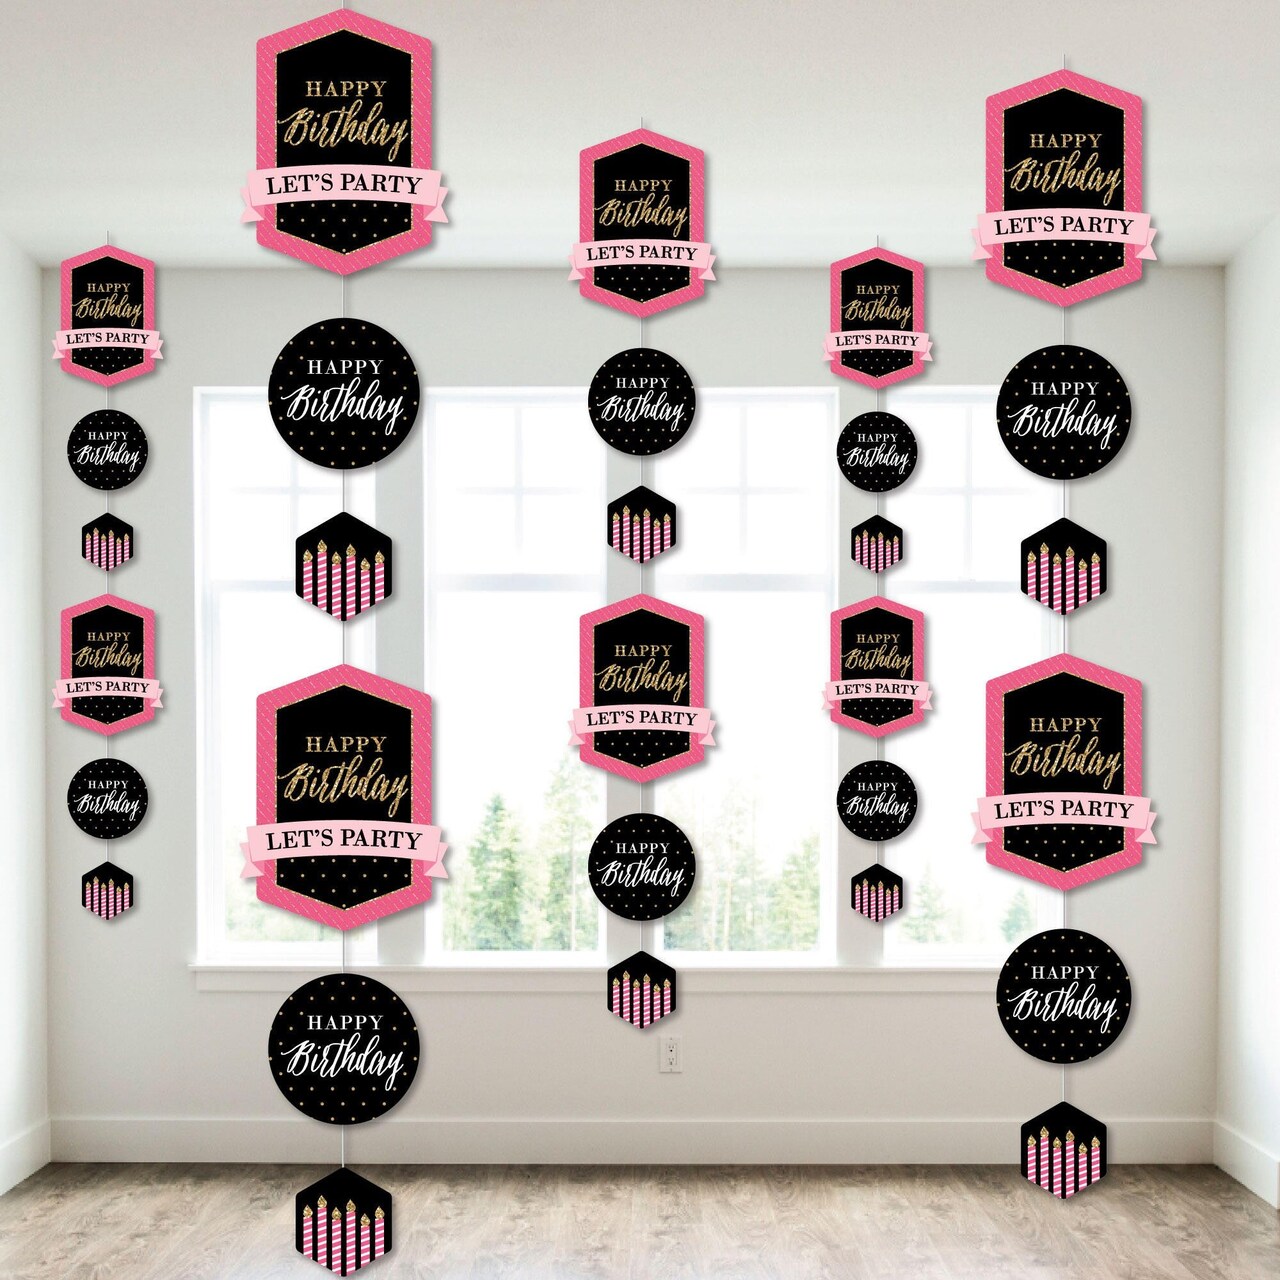 Big Dot of Happiness Chic Happy Birthday - Pink, Black and Gold - Birthday Party DIY Dangler Backdrop - Hanging Vertical Decorations - 30 Pieces